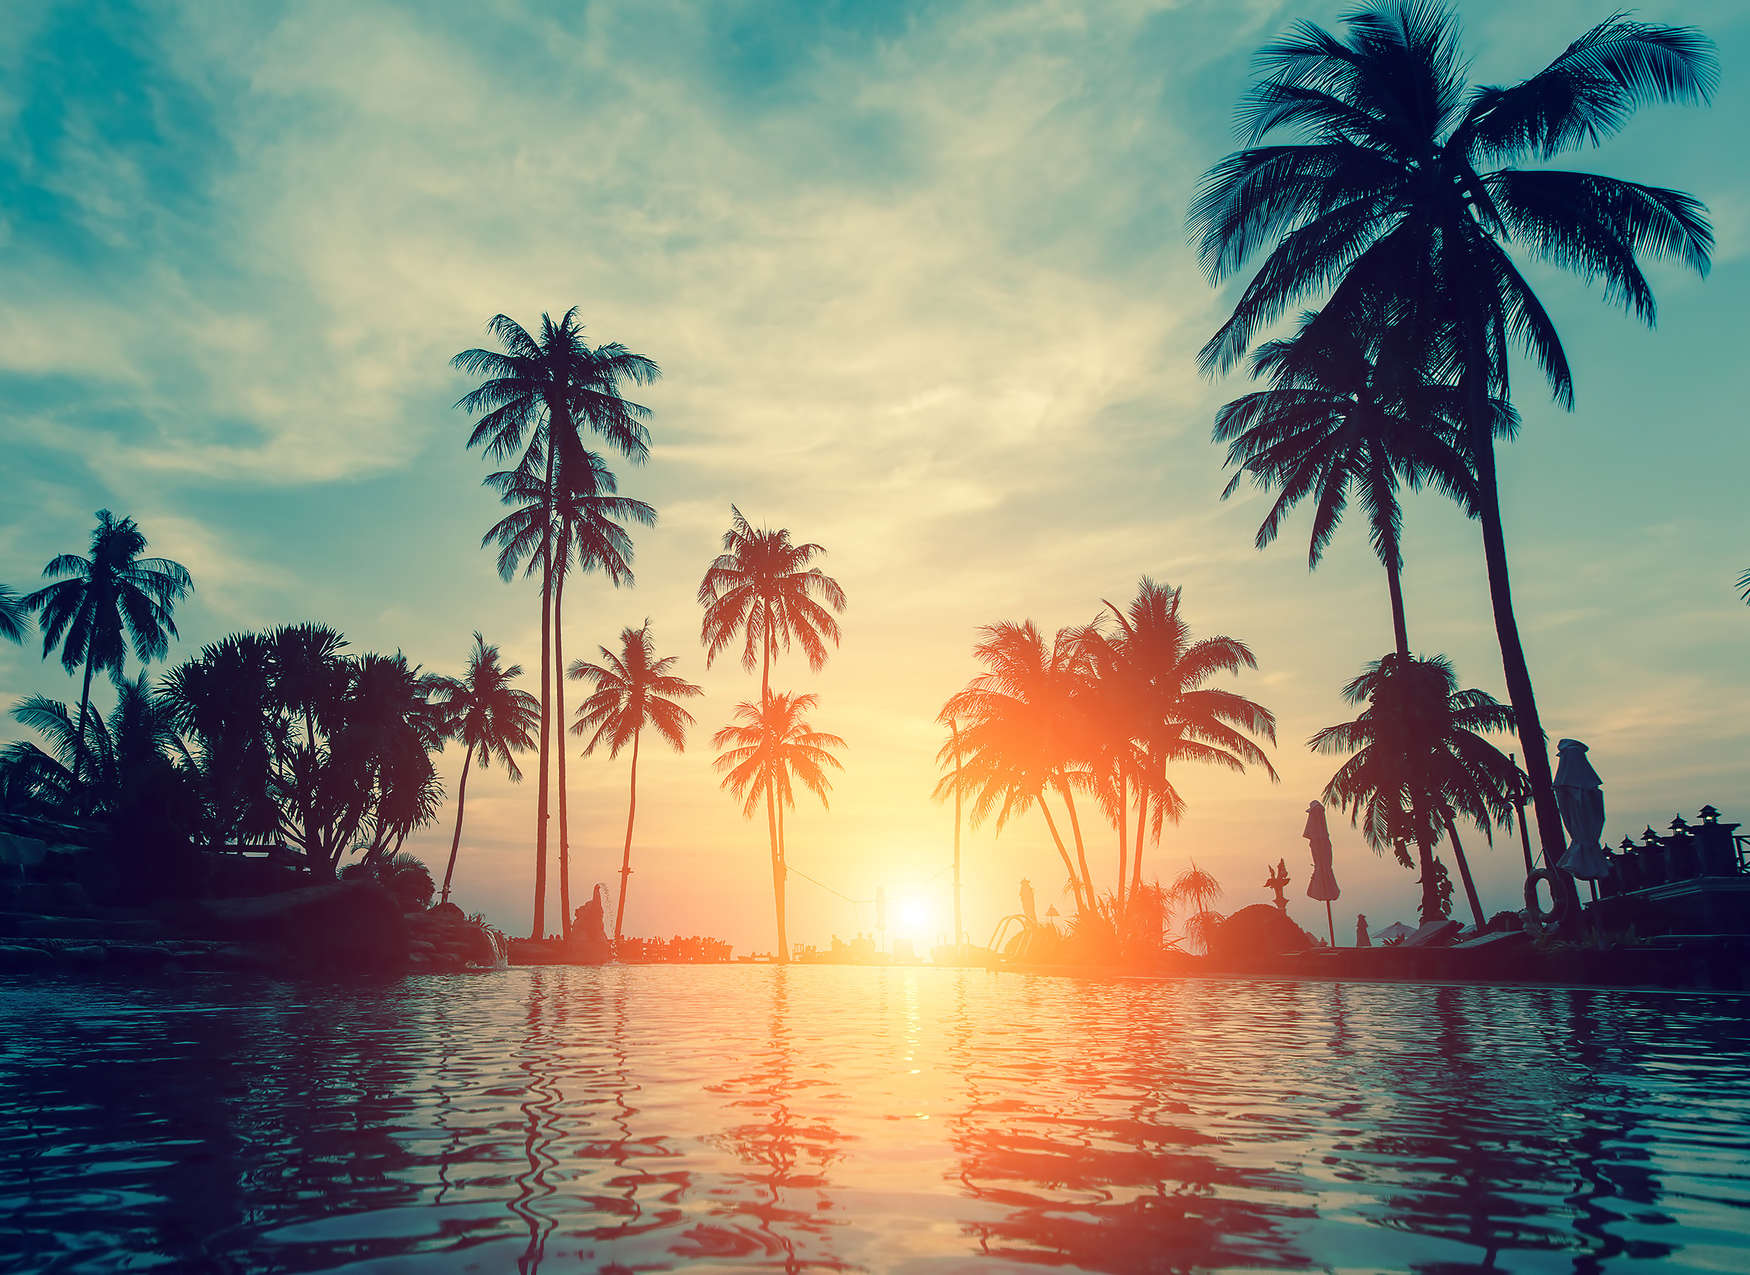             Photo wallpaper with palm trees on the water in the sunset - blue, orange, black
        